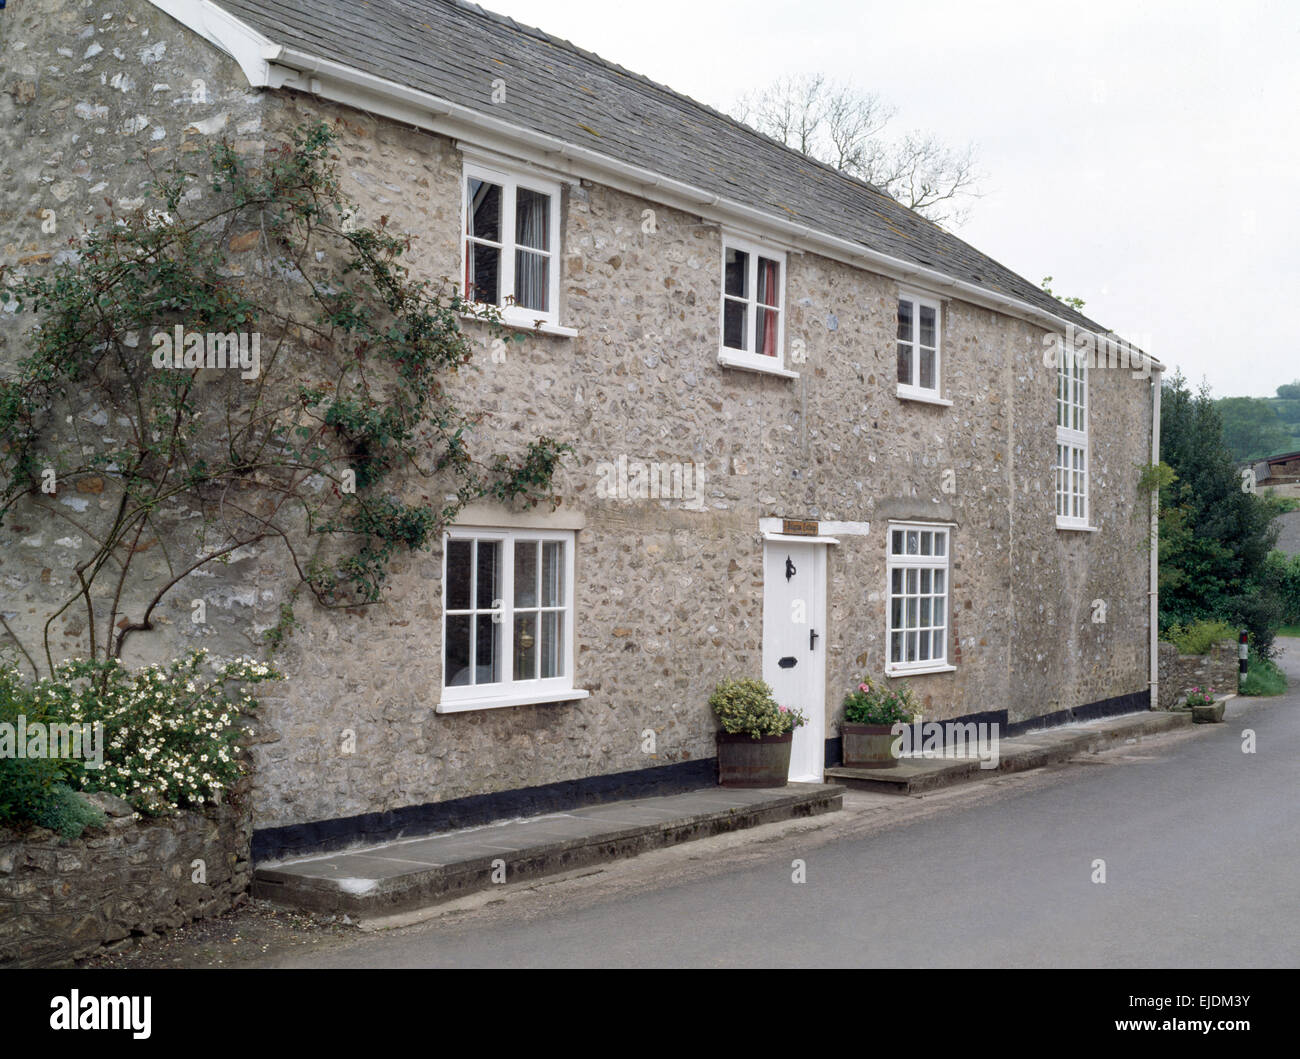 Exterior of stone country house with white painted windows and front door Stock Photo